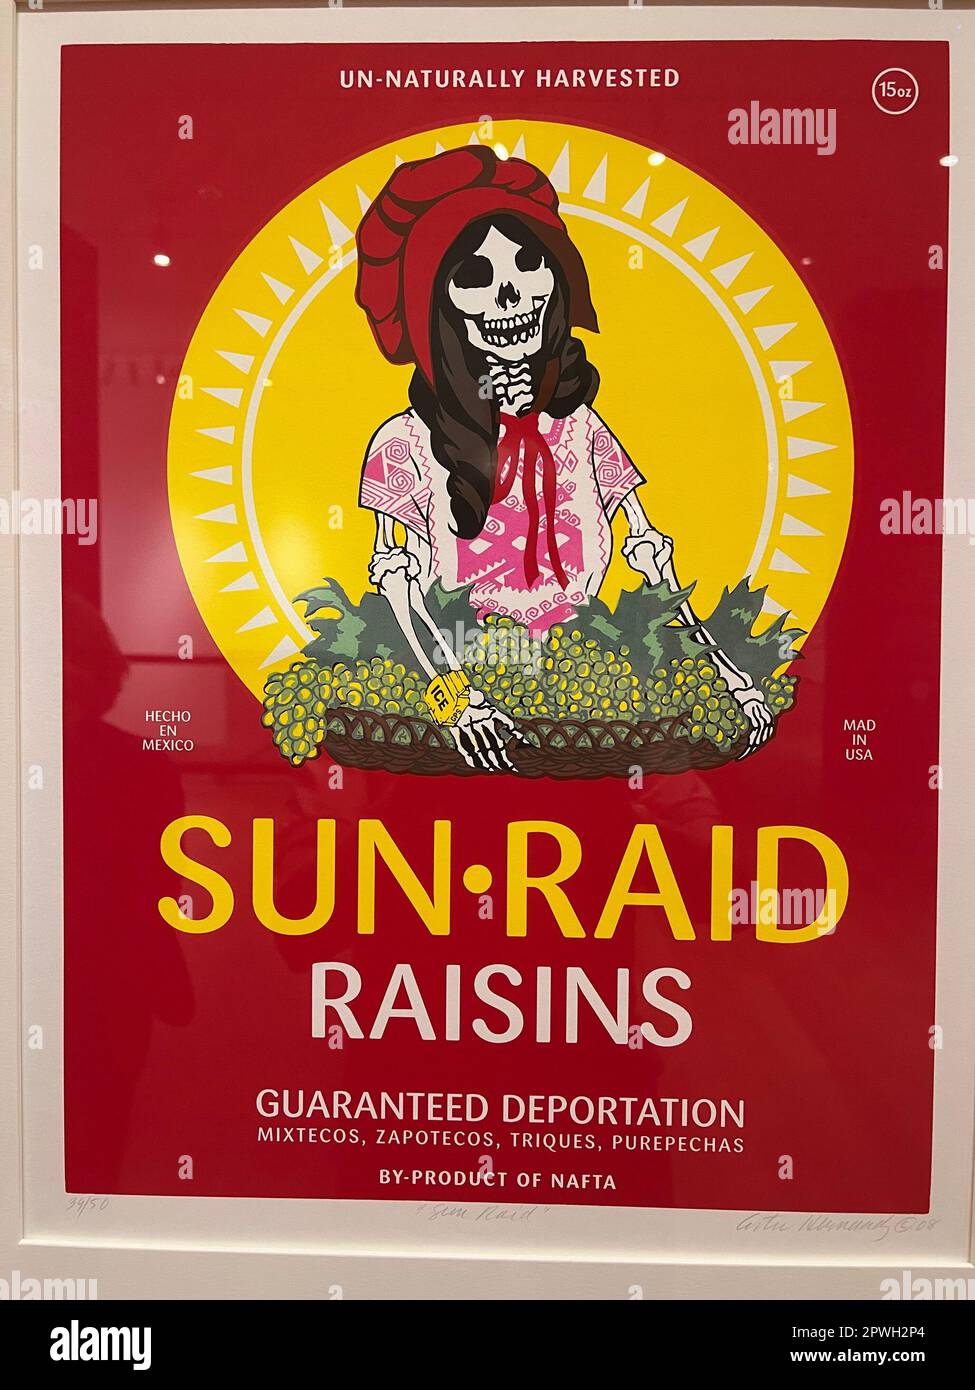 Sun Raid, Ester Hernandez, 2008. Twenty-six years after her original, Hernandez reimagines her classic 'Sun Mad' poster as a condemnation of U.S. Immigration and Customs Enforcement. In addition to changing the title from 'Sun Mad' to 'Sun Raid,' she outfits the calavera (skeleton) with an ICE wrist monitor and a huipil, a traditional indigenous garment. This latter reference suggests how indigenous people from Mexico and Central America represent a segment of undocumented immigrants in the U.S. Hernandez issued this print at a time when the George W. Bush administration was being widely criti Stock Photo